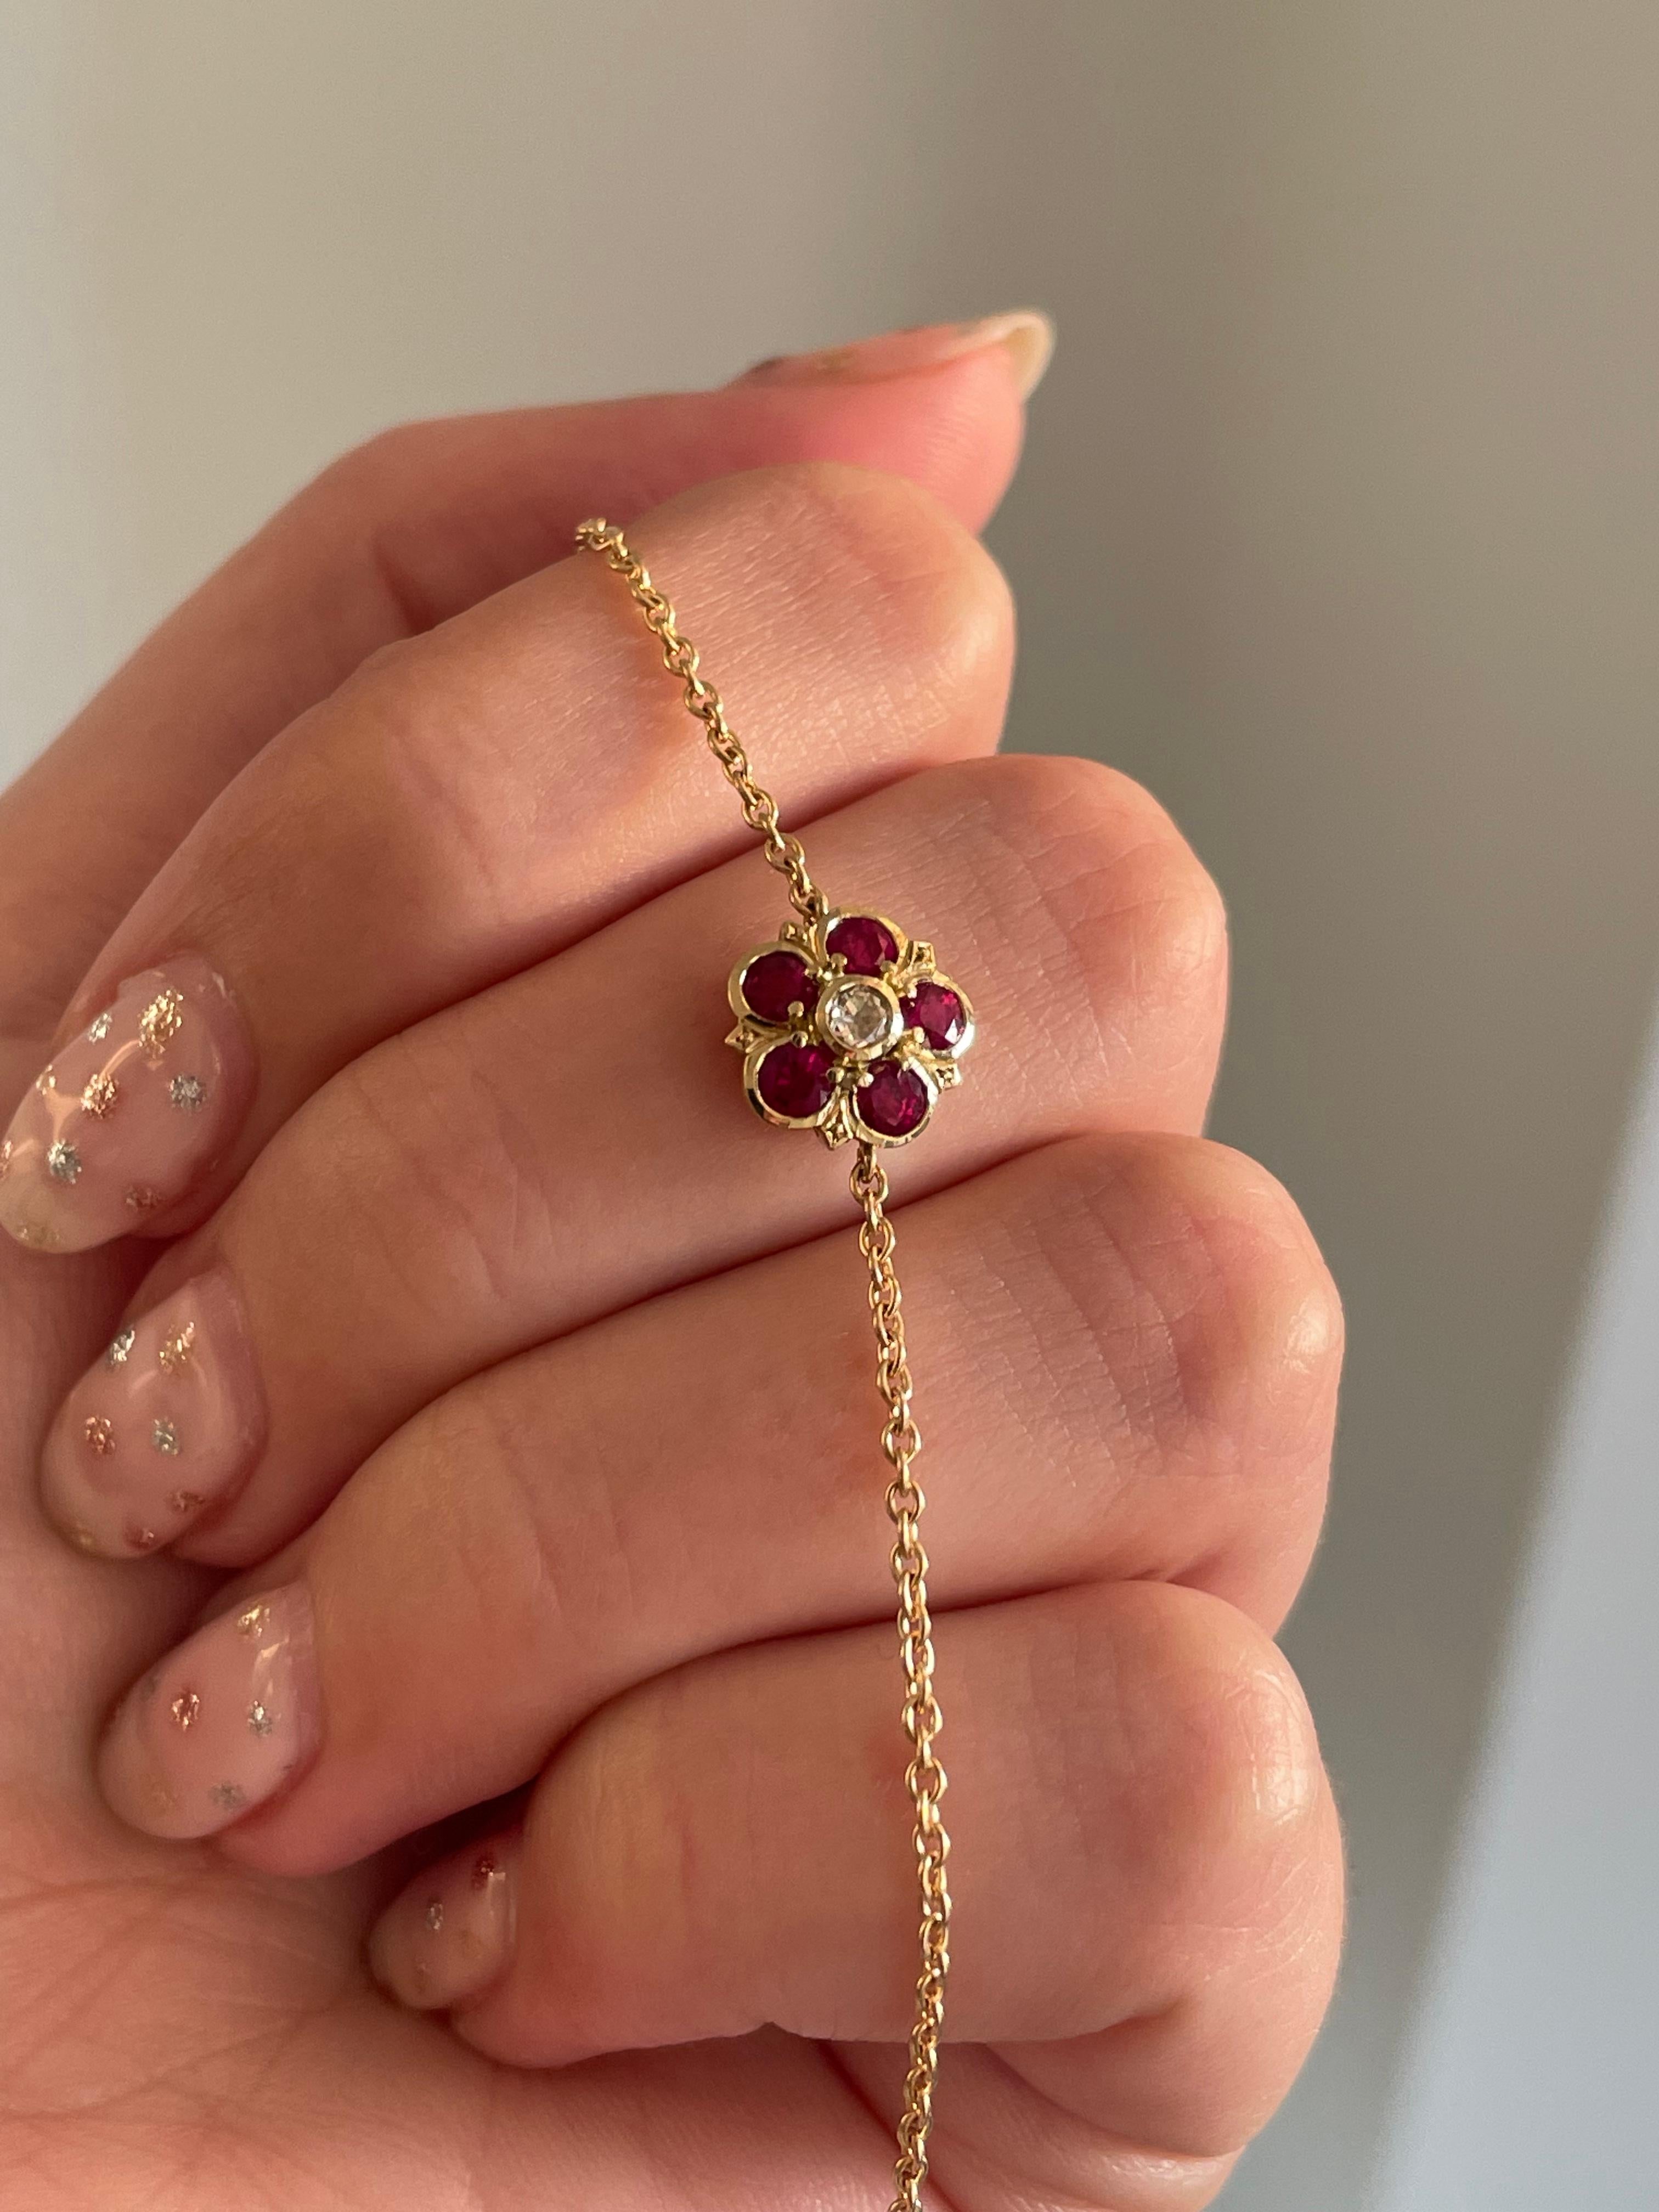 The ruby & diamond Rose bracelet features round brilliant-cut rubies surrounding a rose cut diamond. In true Aril Jewels style, the back of the bracelet is just as gorgeous, featuring a tiny rose cut diamond - an extra detail just for the wearer.  